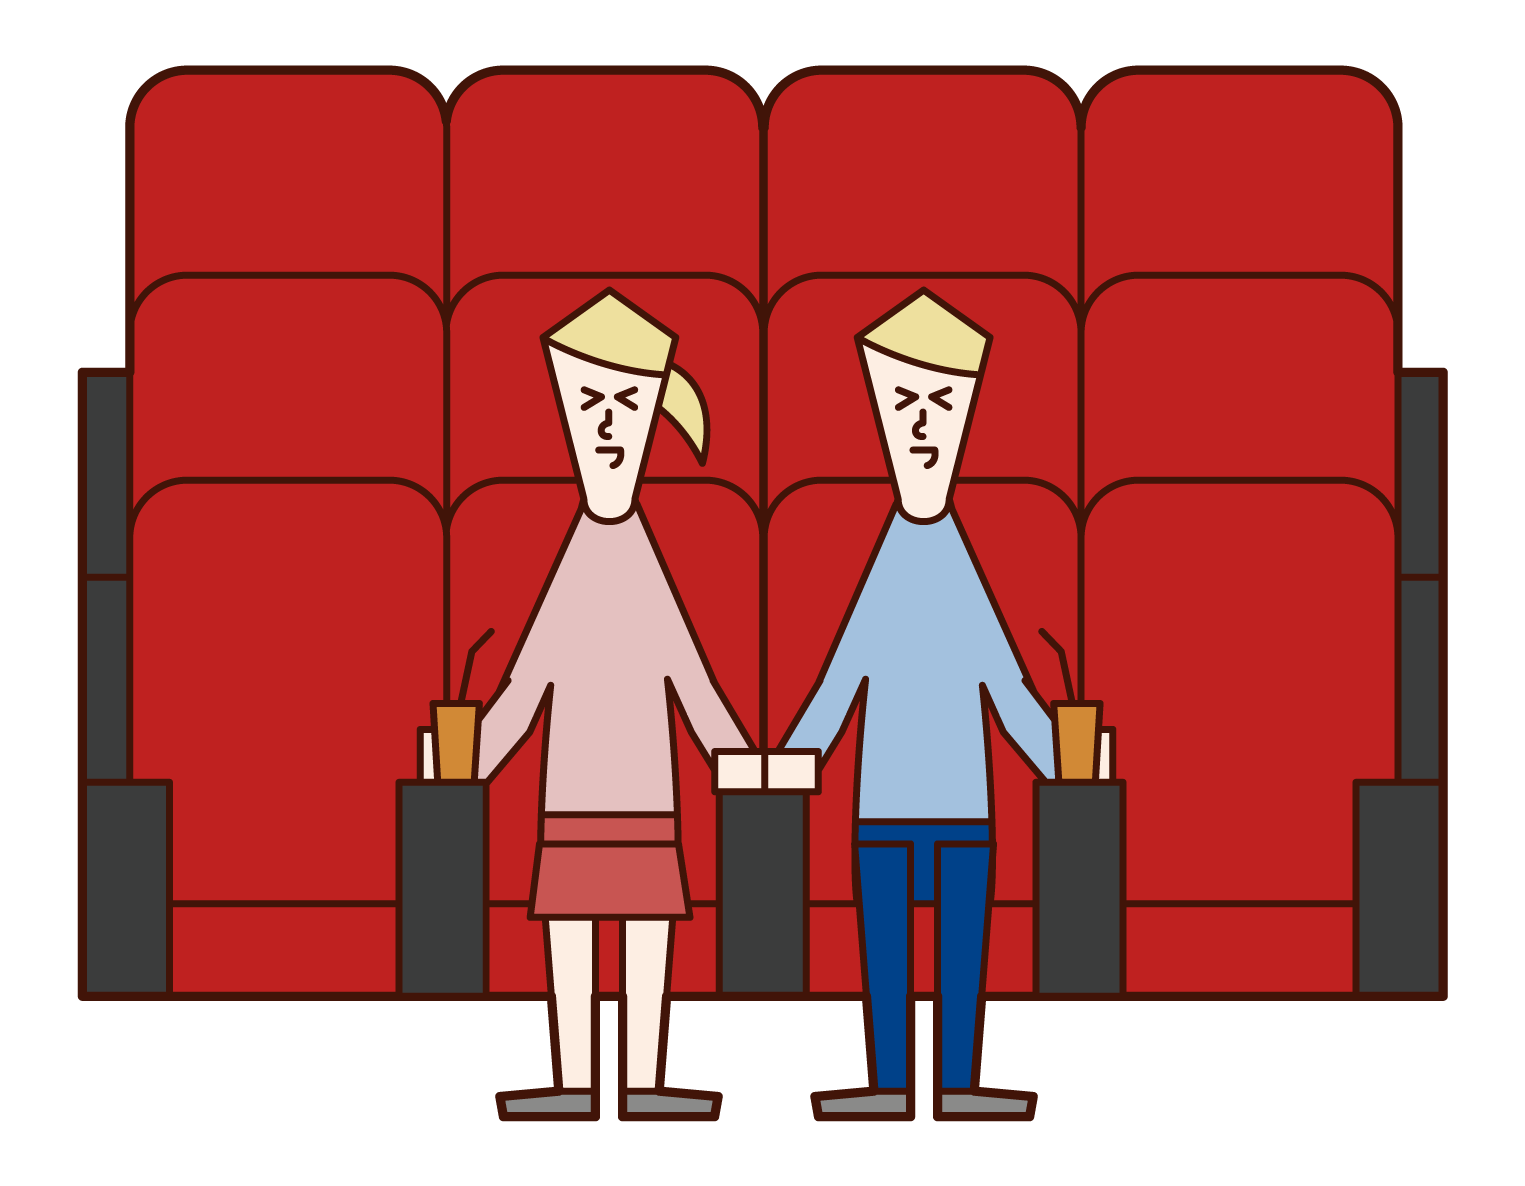 Illustrations of people laughing while watching movies in movie theaters